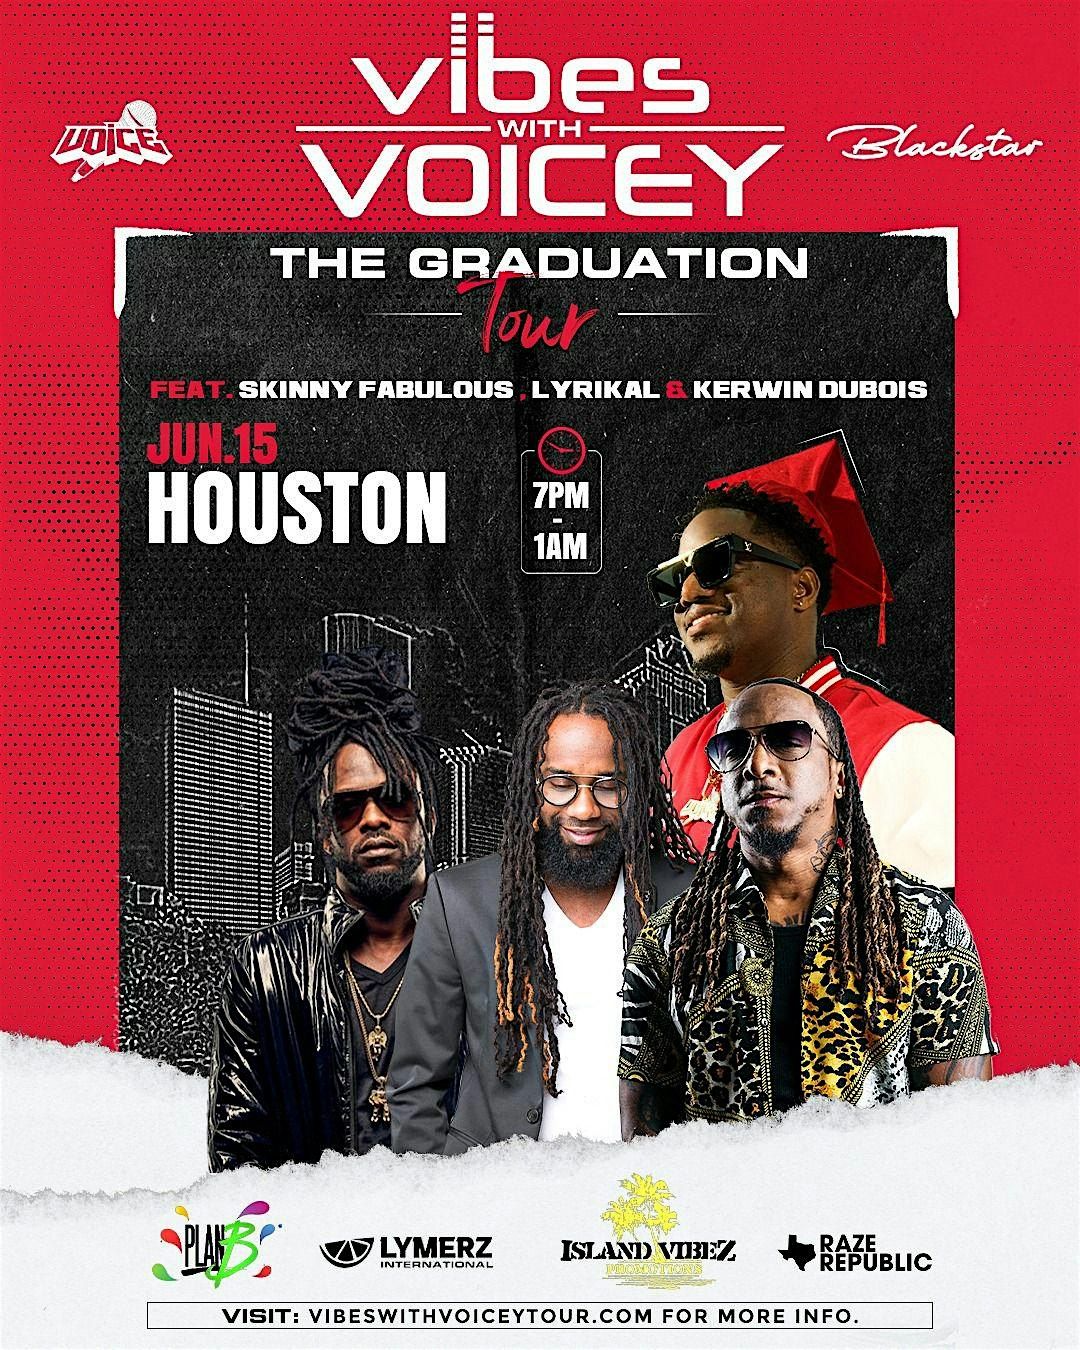 Vibes With Voicey The Graduation Tour - New York City